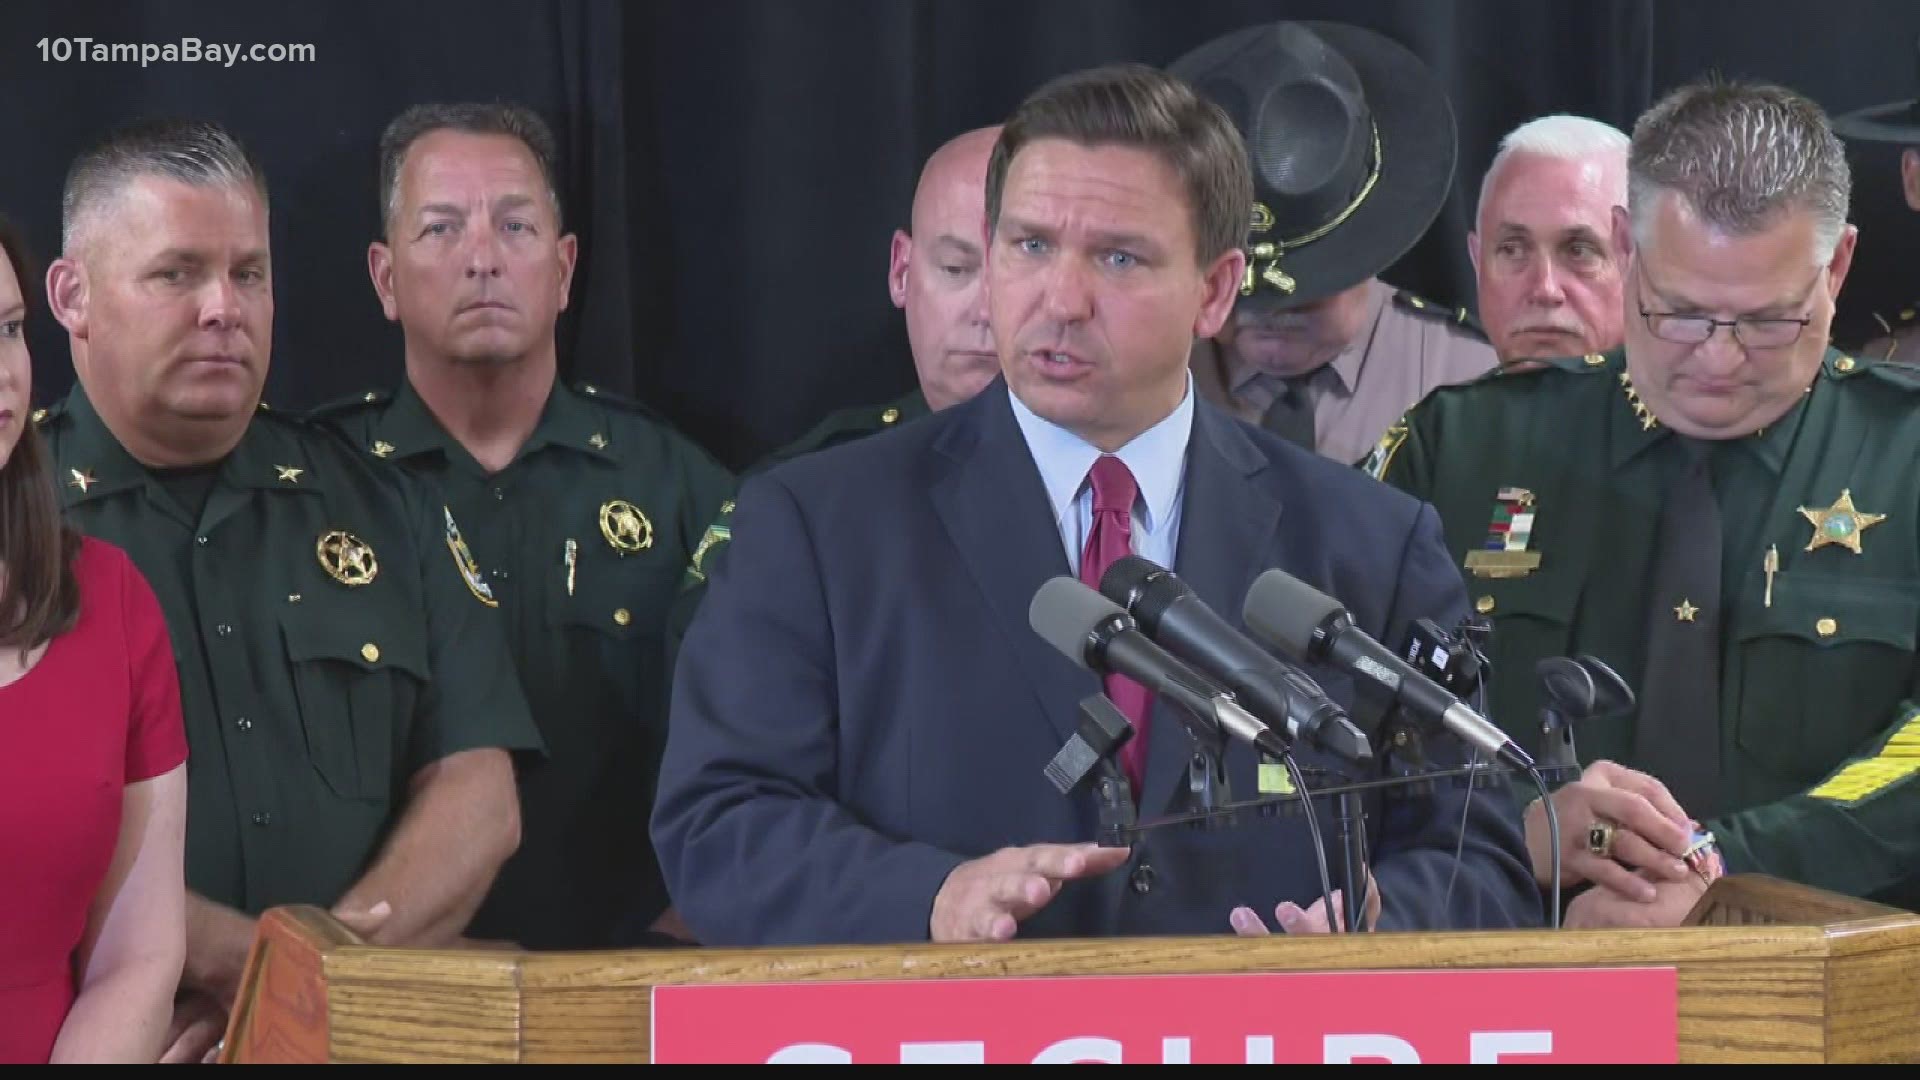 State and local law enforcement resources will be sent west, the governor said.